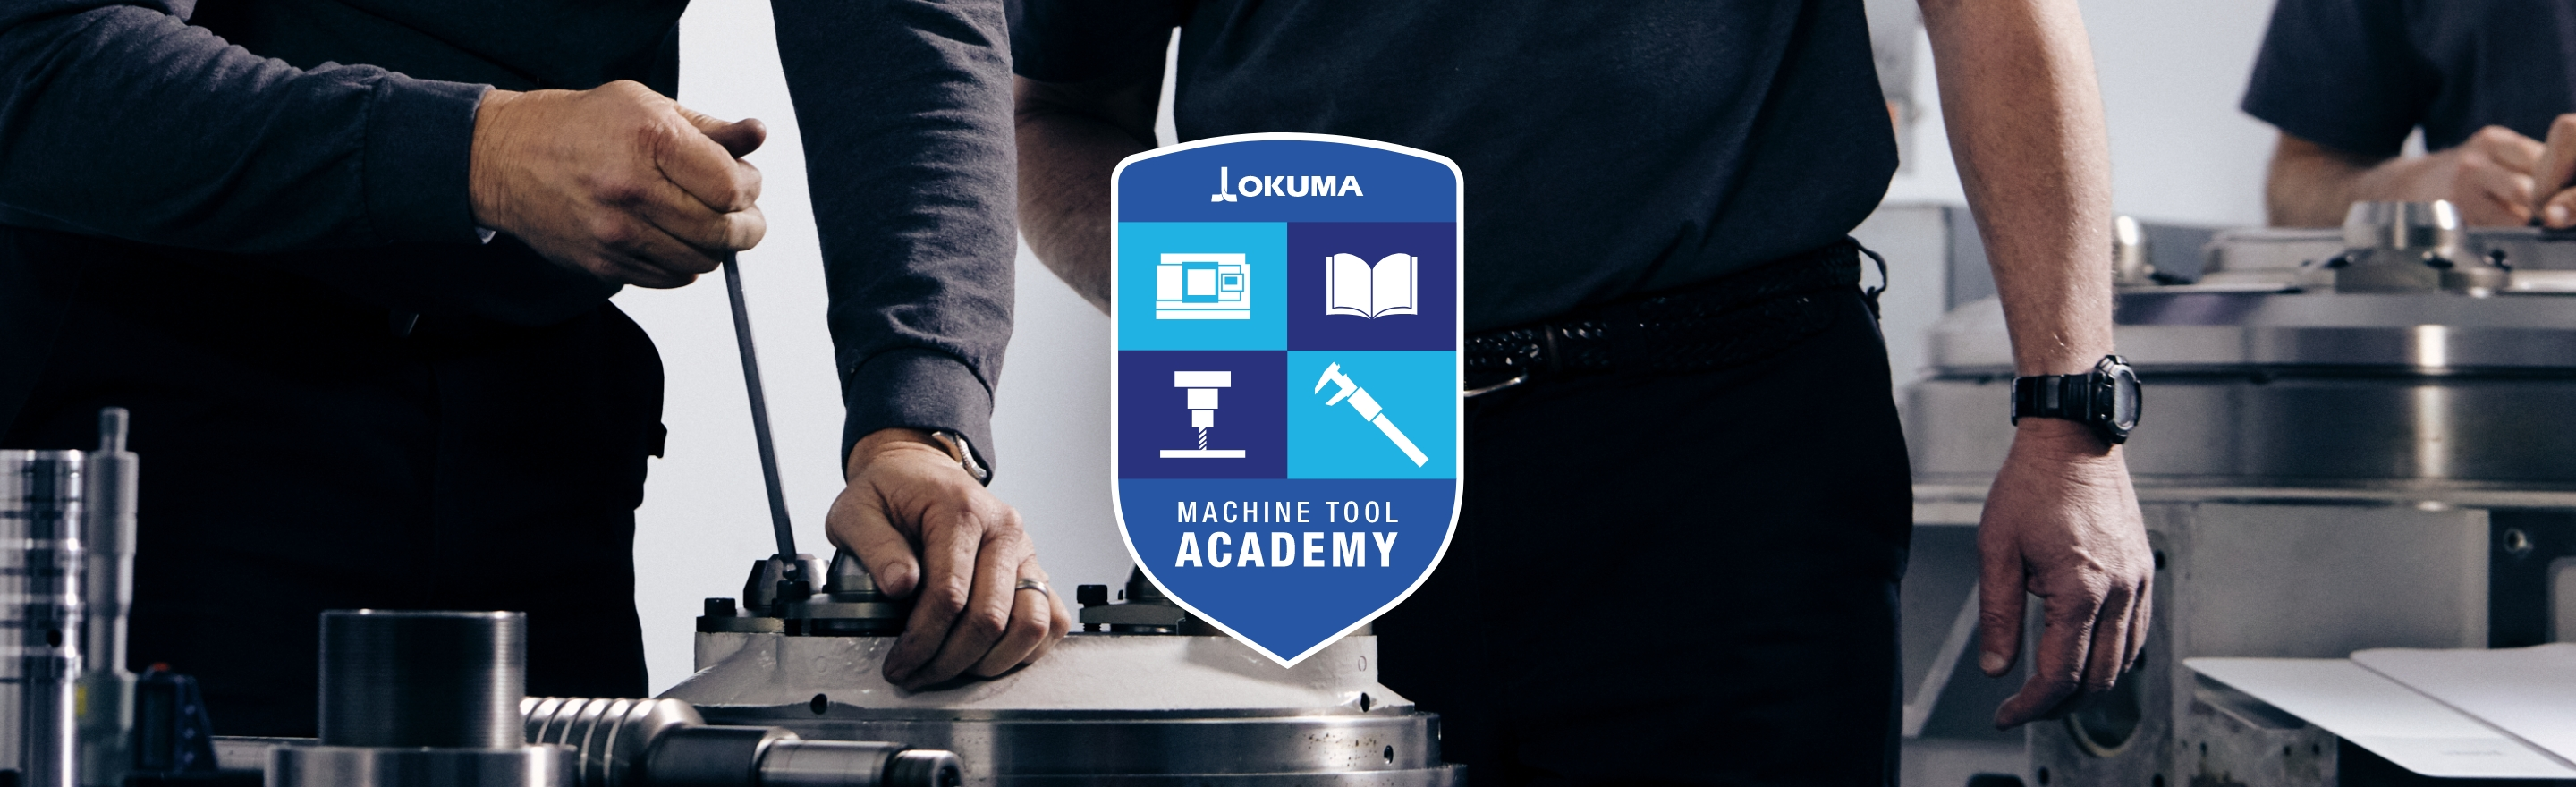 Interested in training courses with okuma machine tool academy?